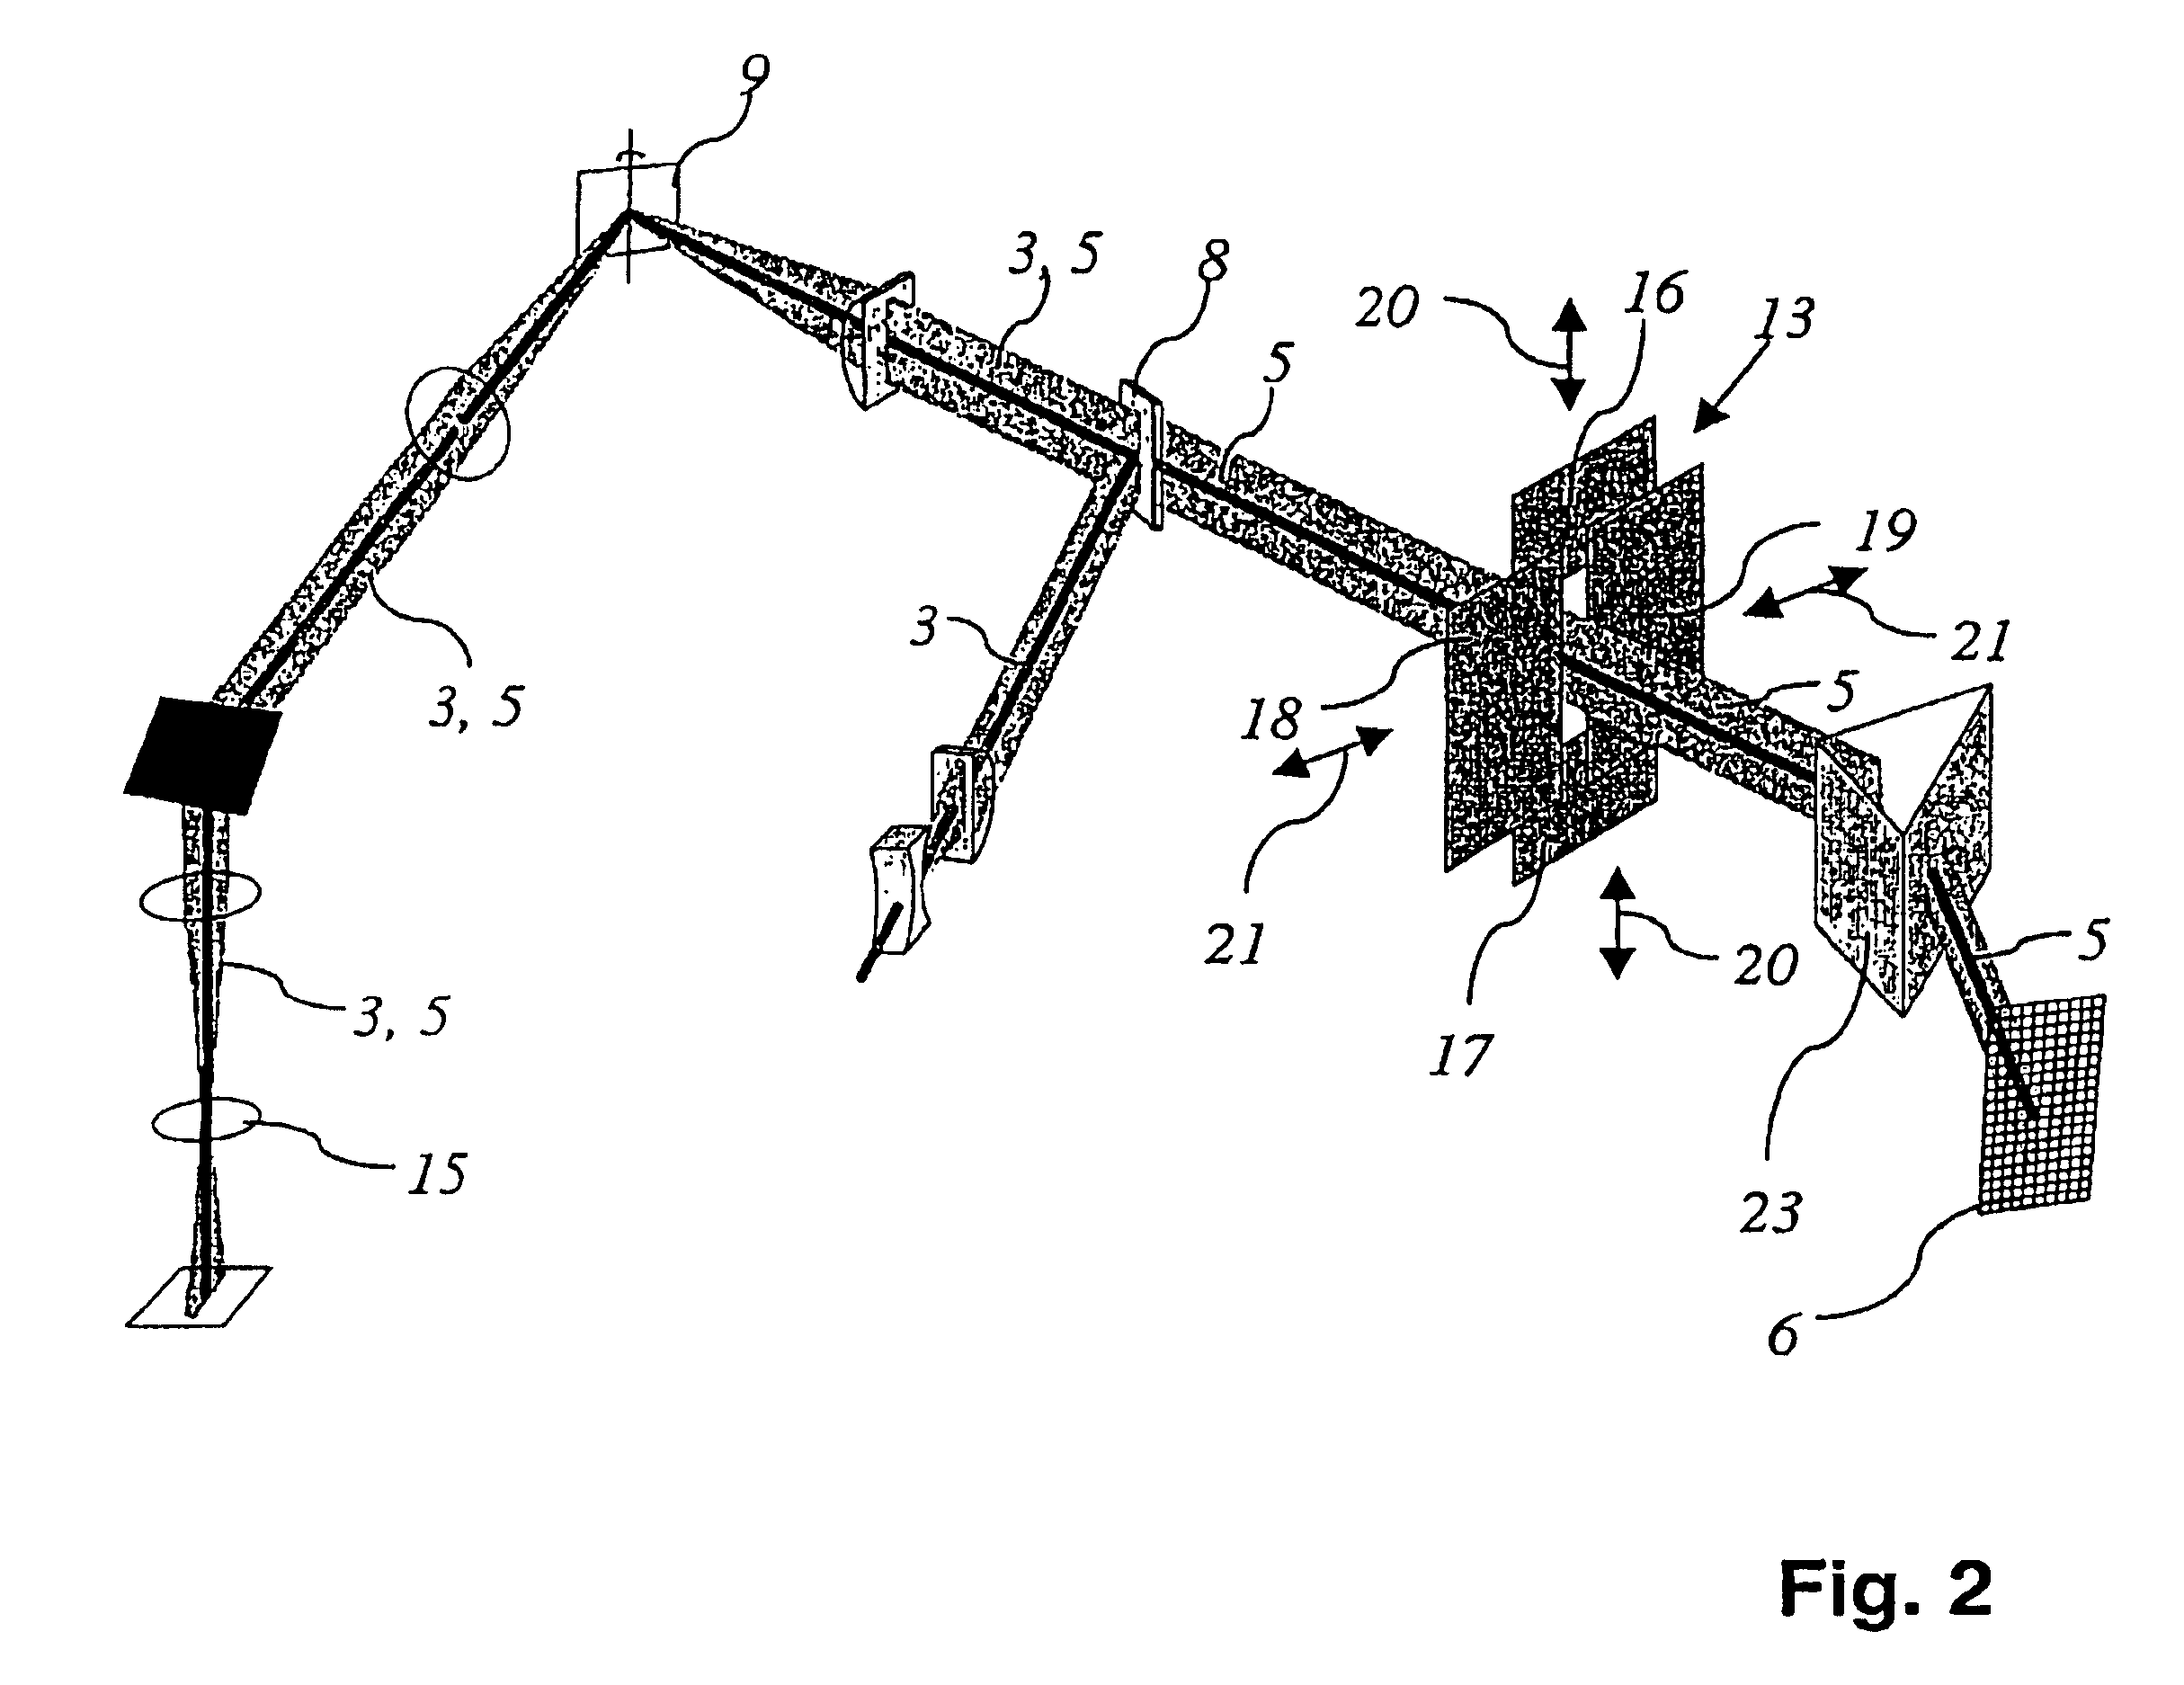 Scanning microscope comprising a confocal slit scanner for imaging an object